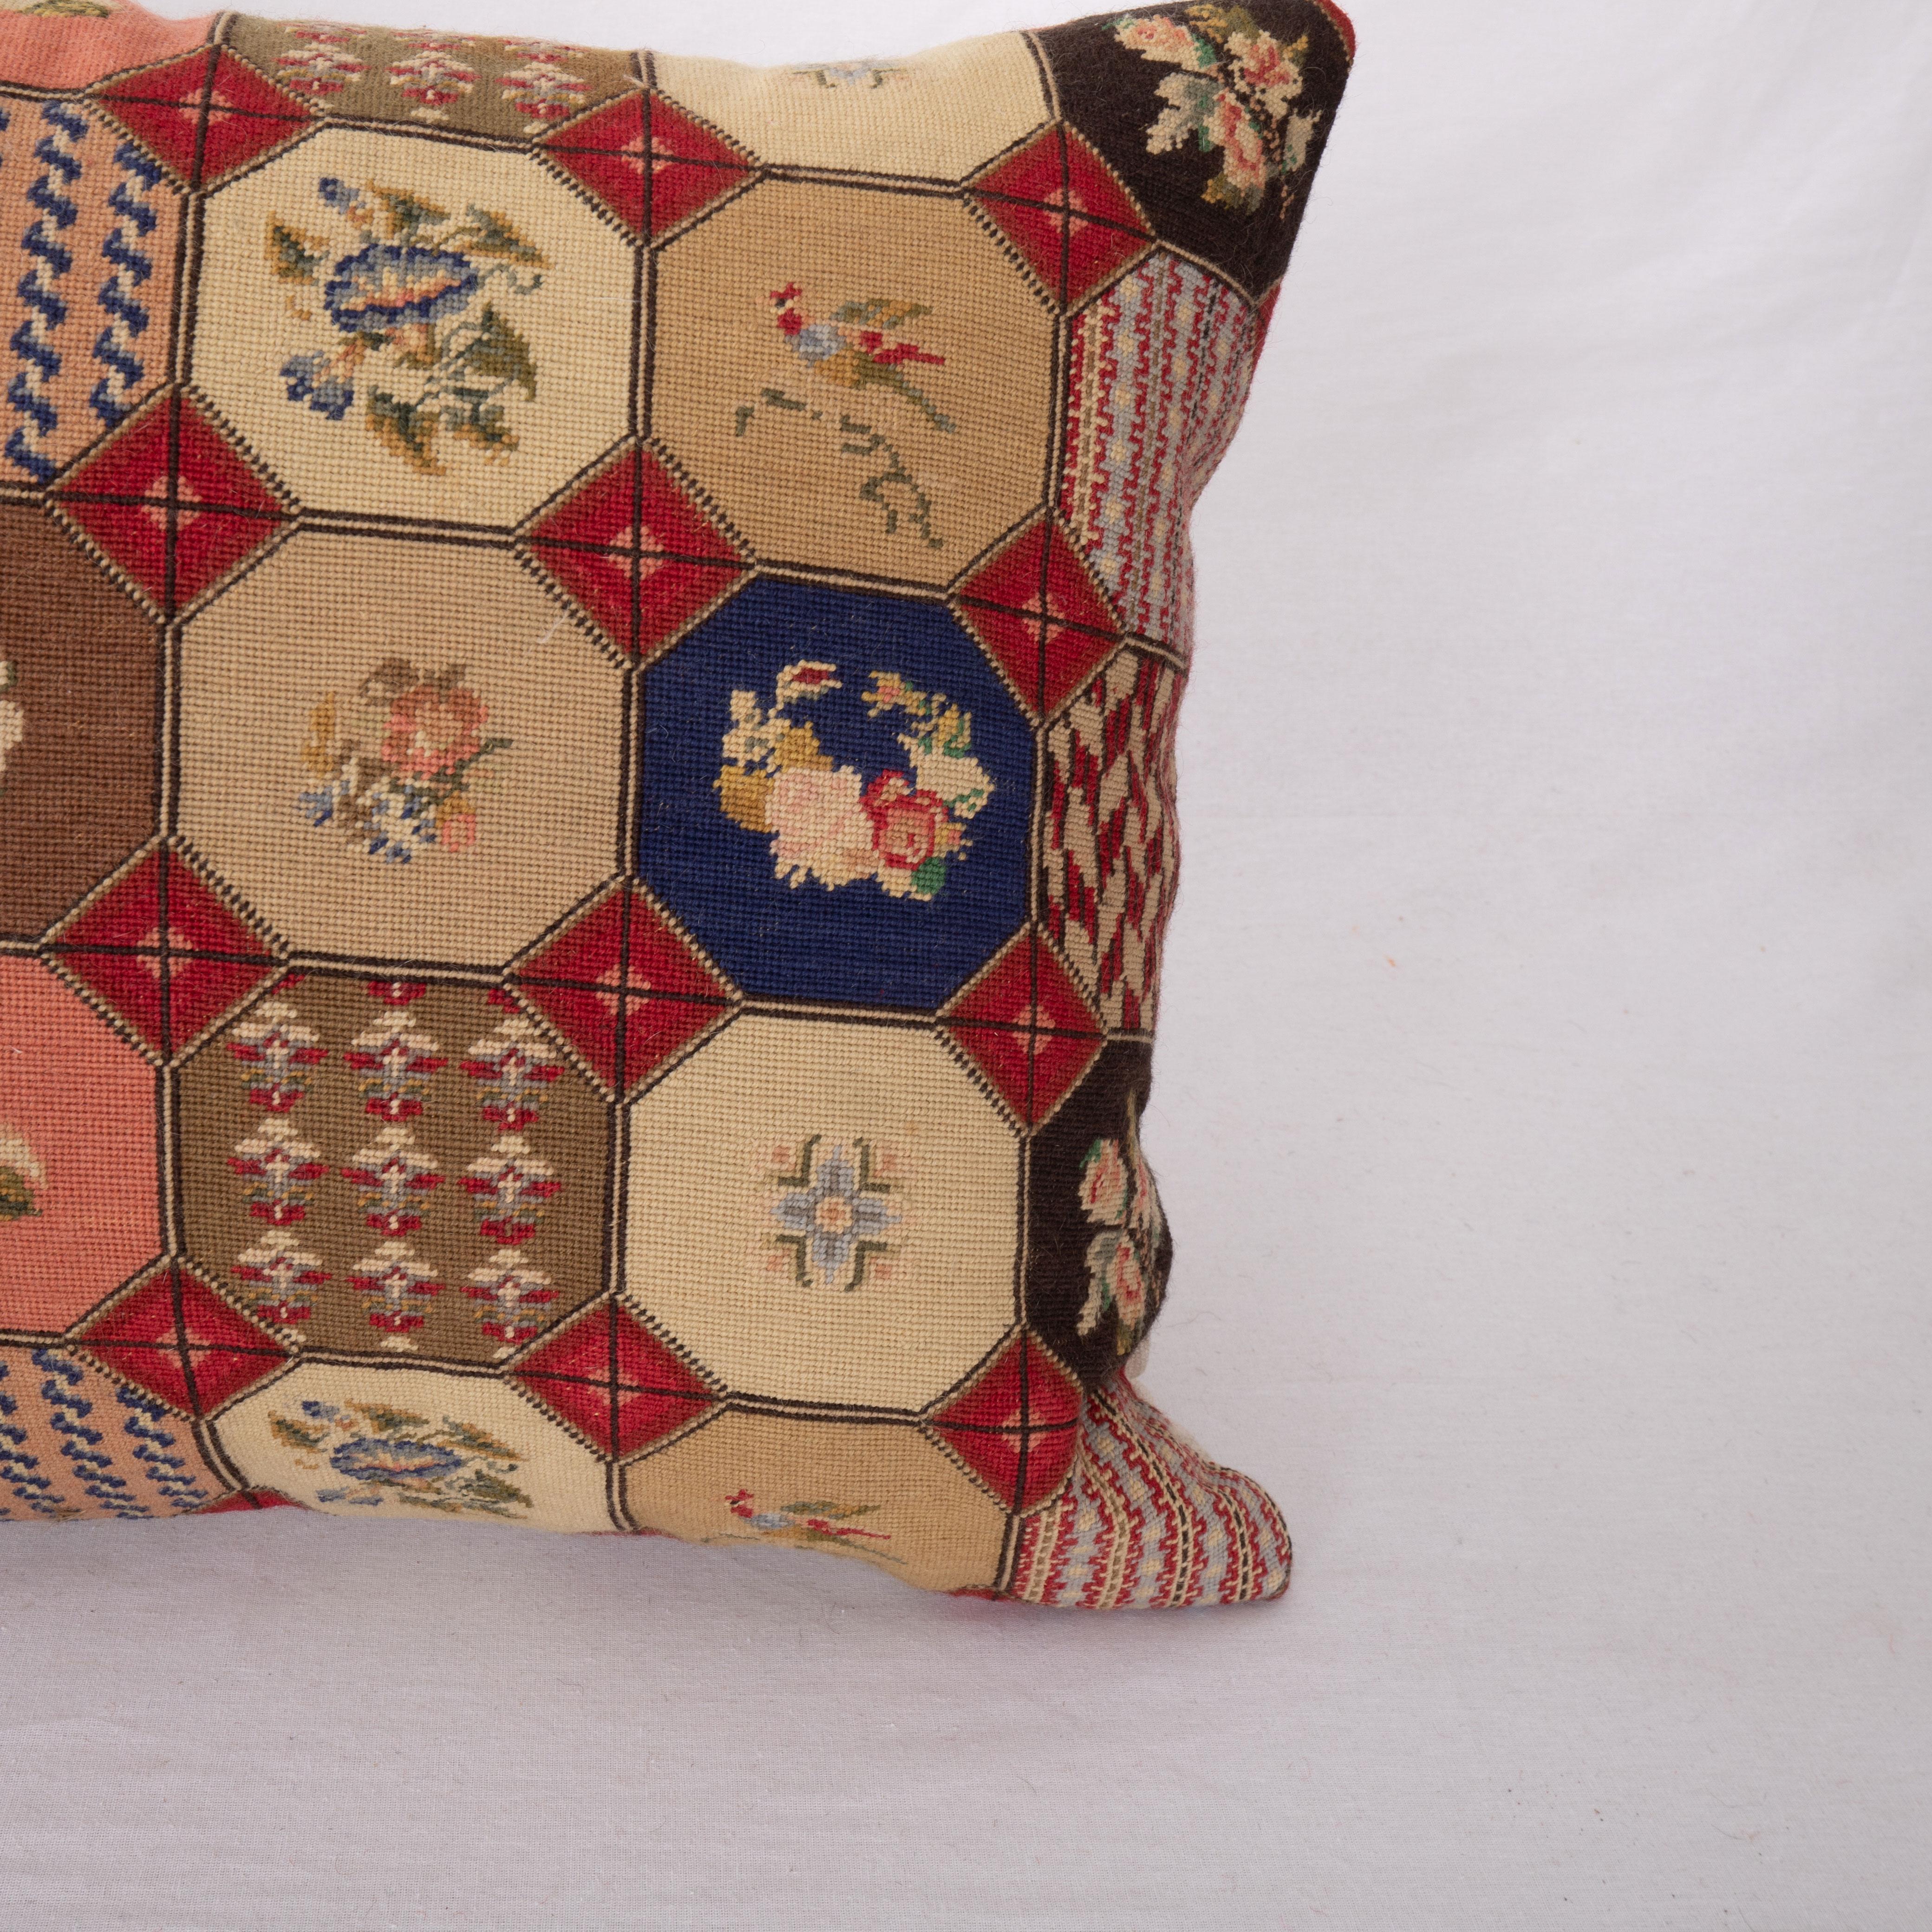 Embroidered Pillow Cover Made from an Antique Petit Point European Embroidery Early 20th C